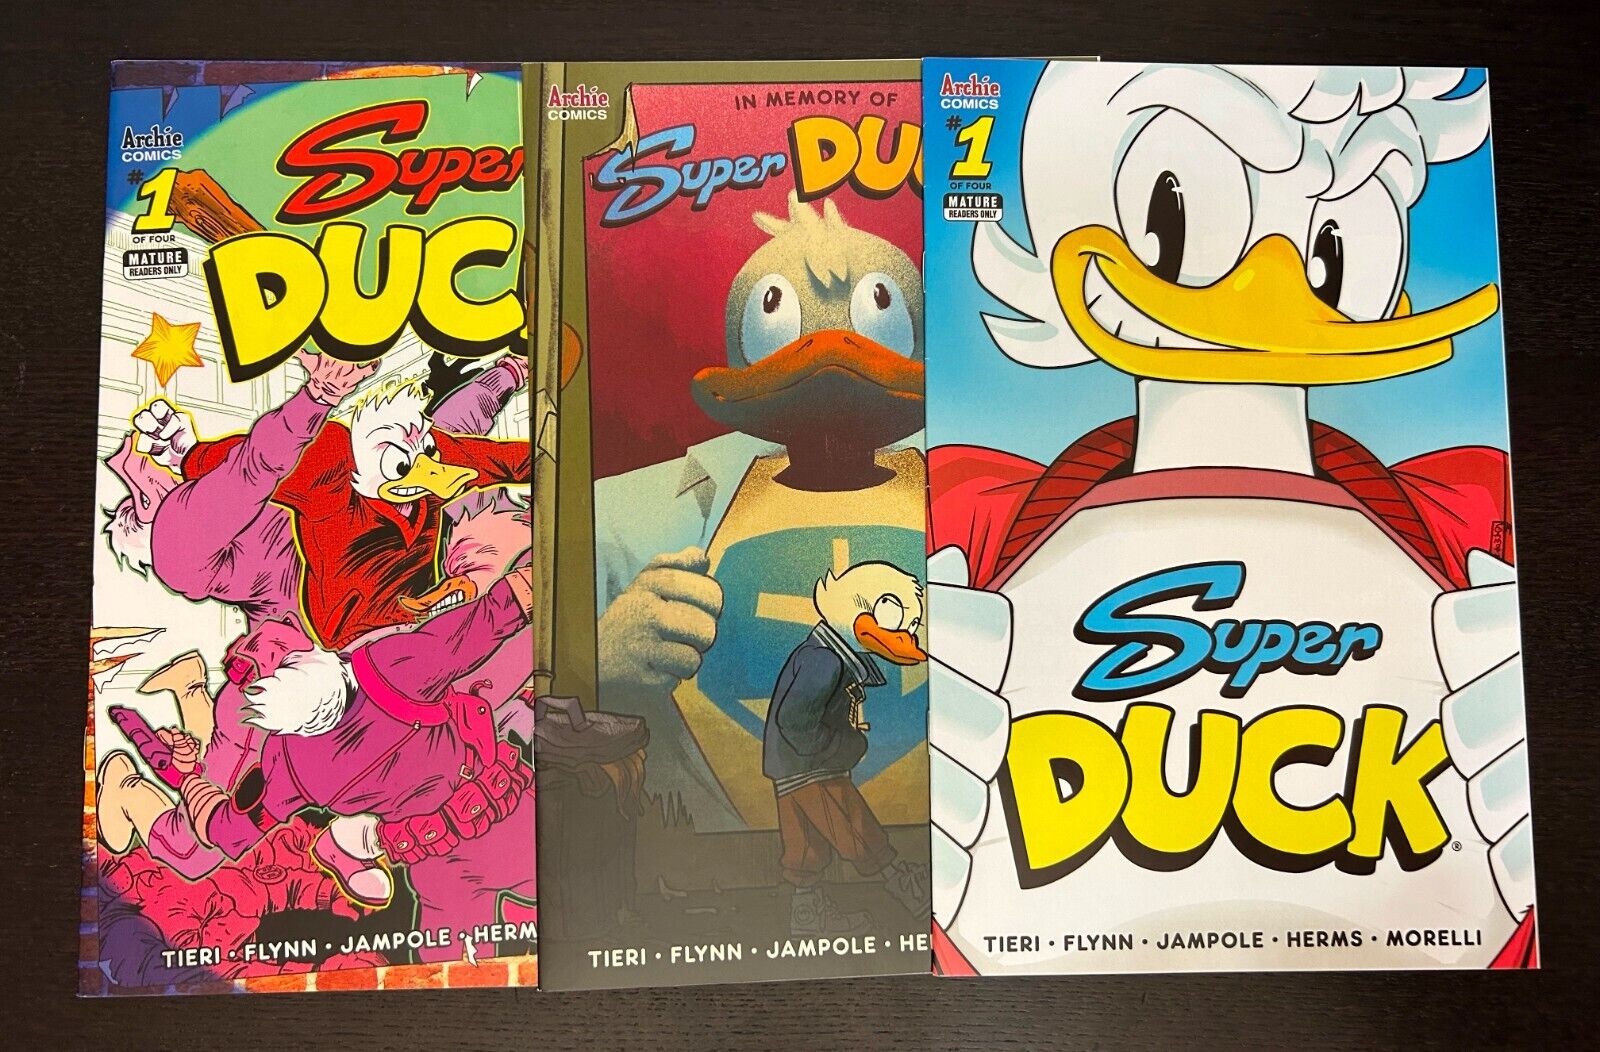 SUPER DUCK #1 (Archie Comics 2020) -- 1st Printing + 2 VARIANT COVERS Set